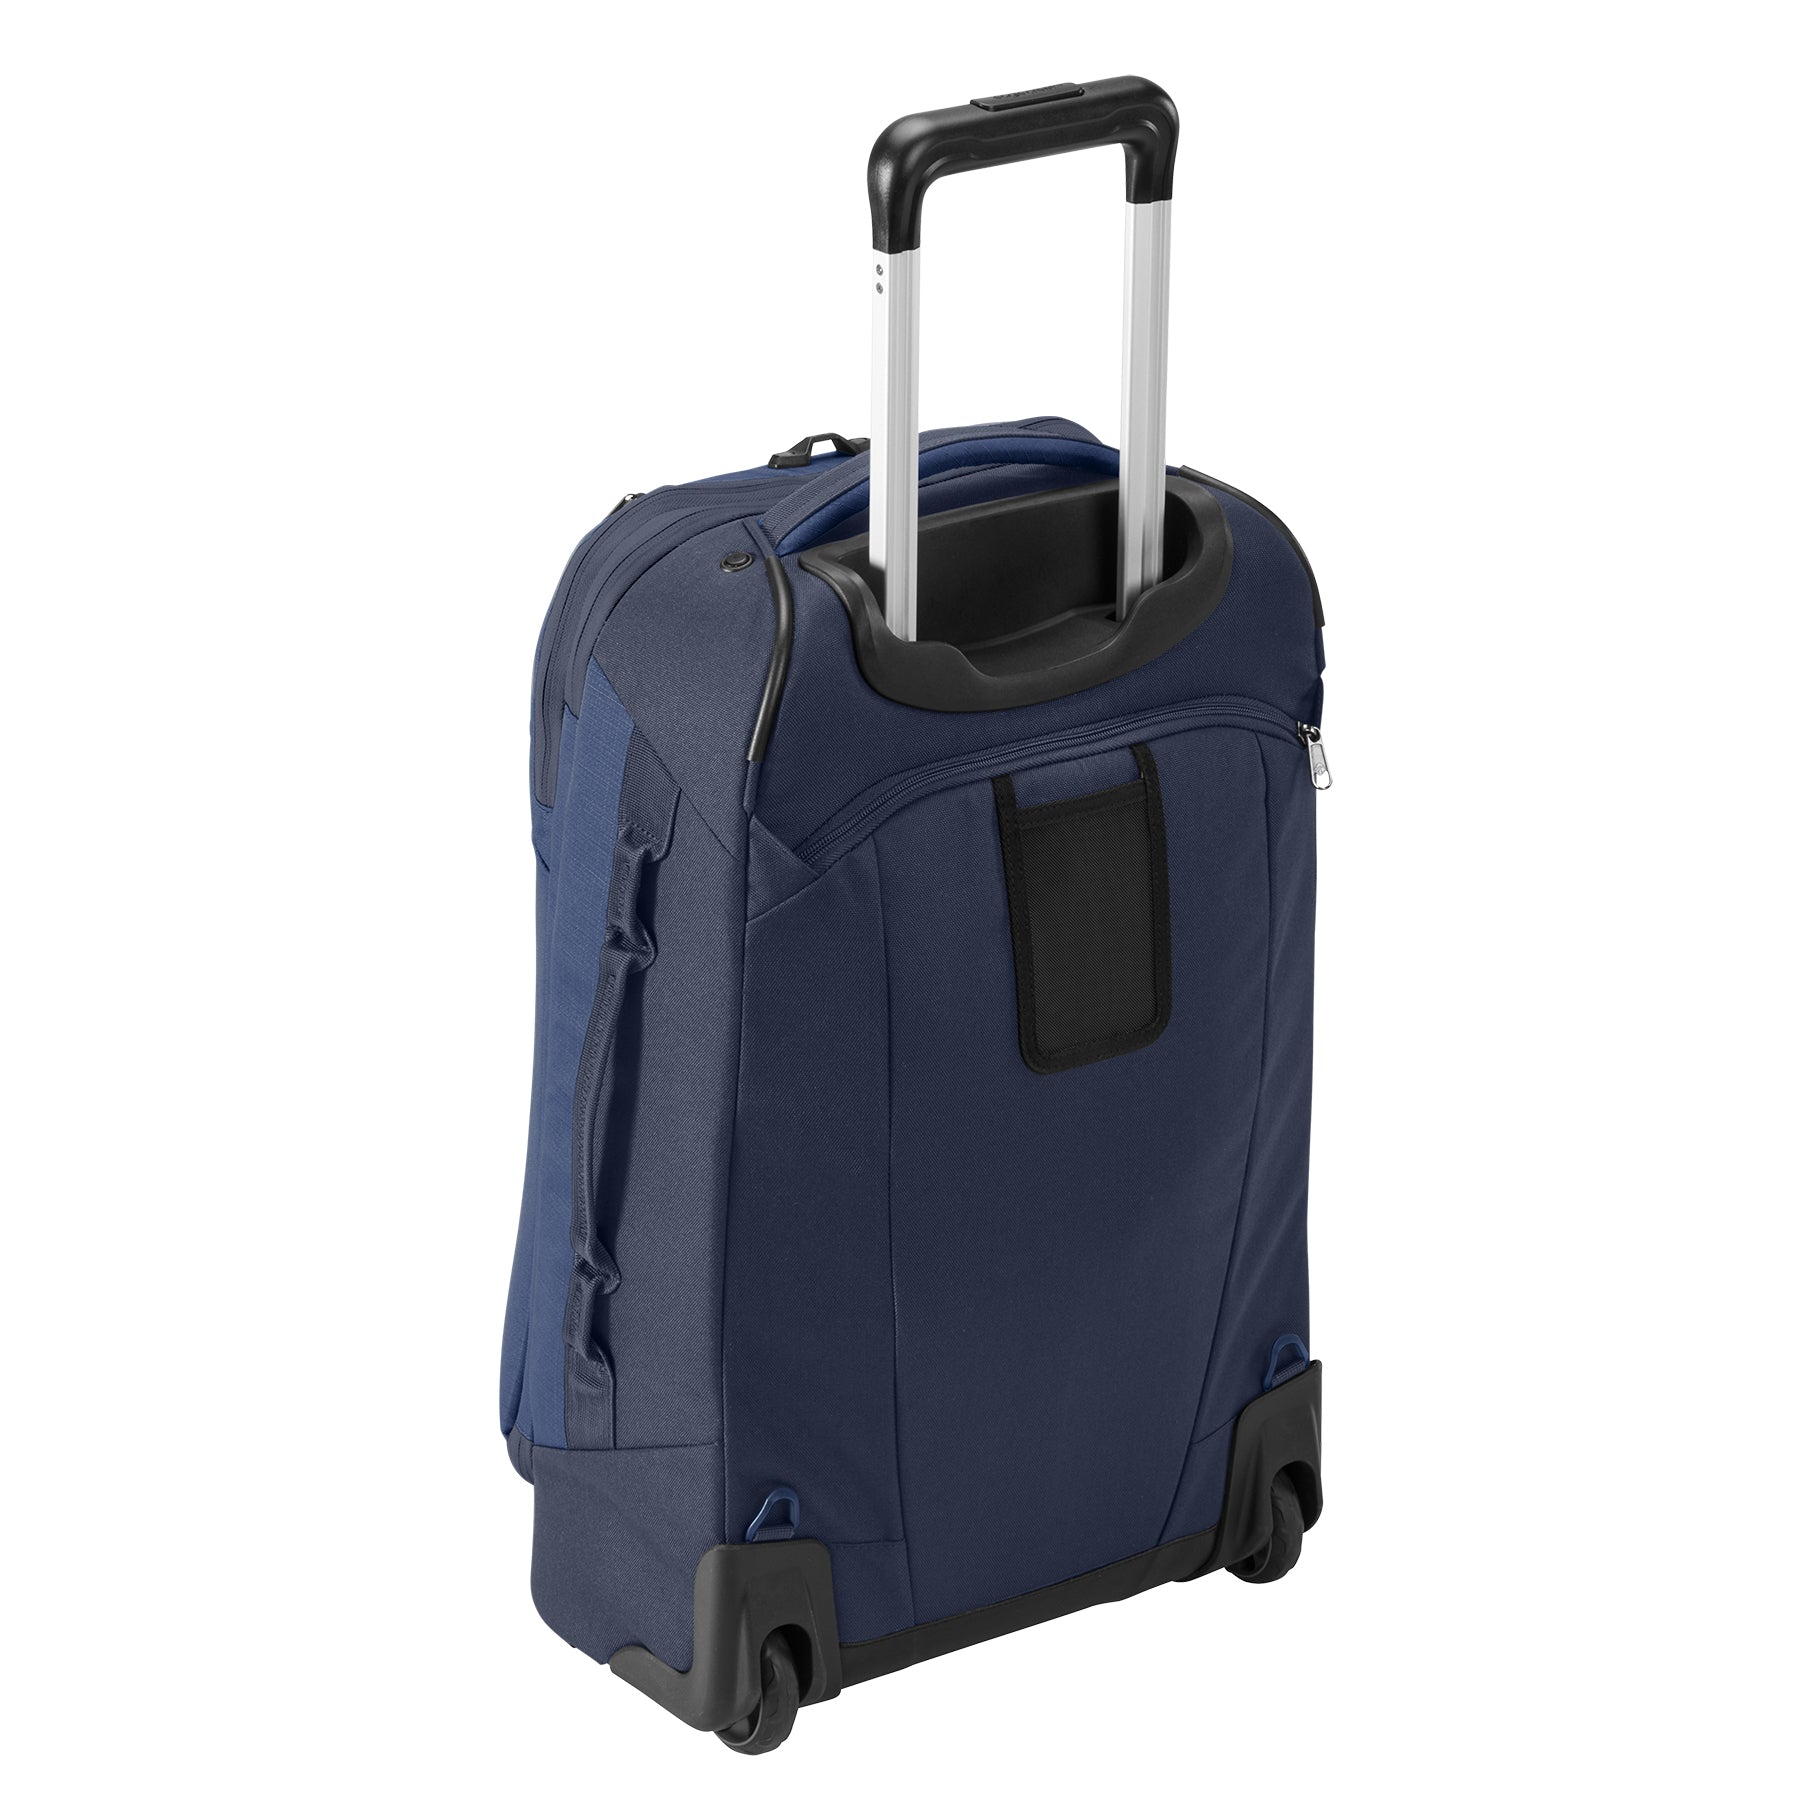 EXPANSE 2-WHEEL 21.25"/38L CONVERTIBLE INTERNATIONAL CARRY ON LUGGAGE